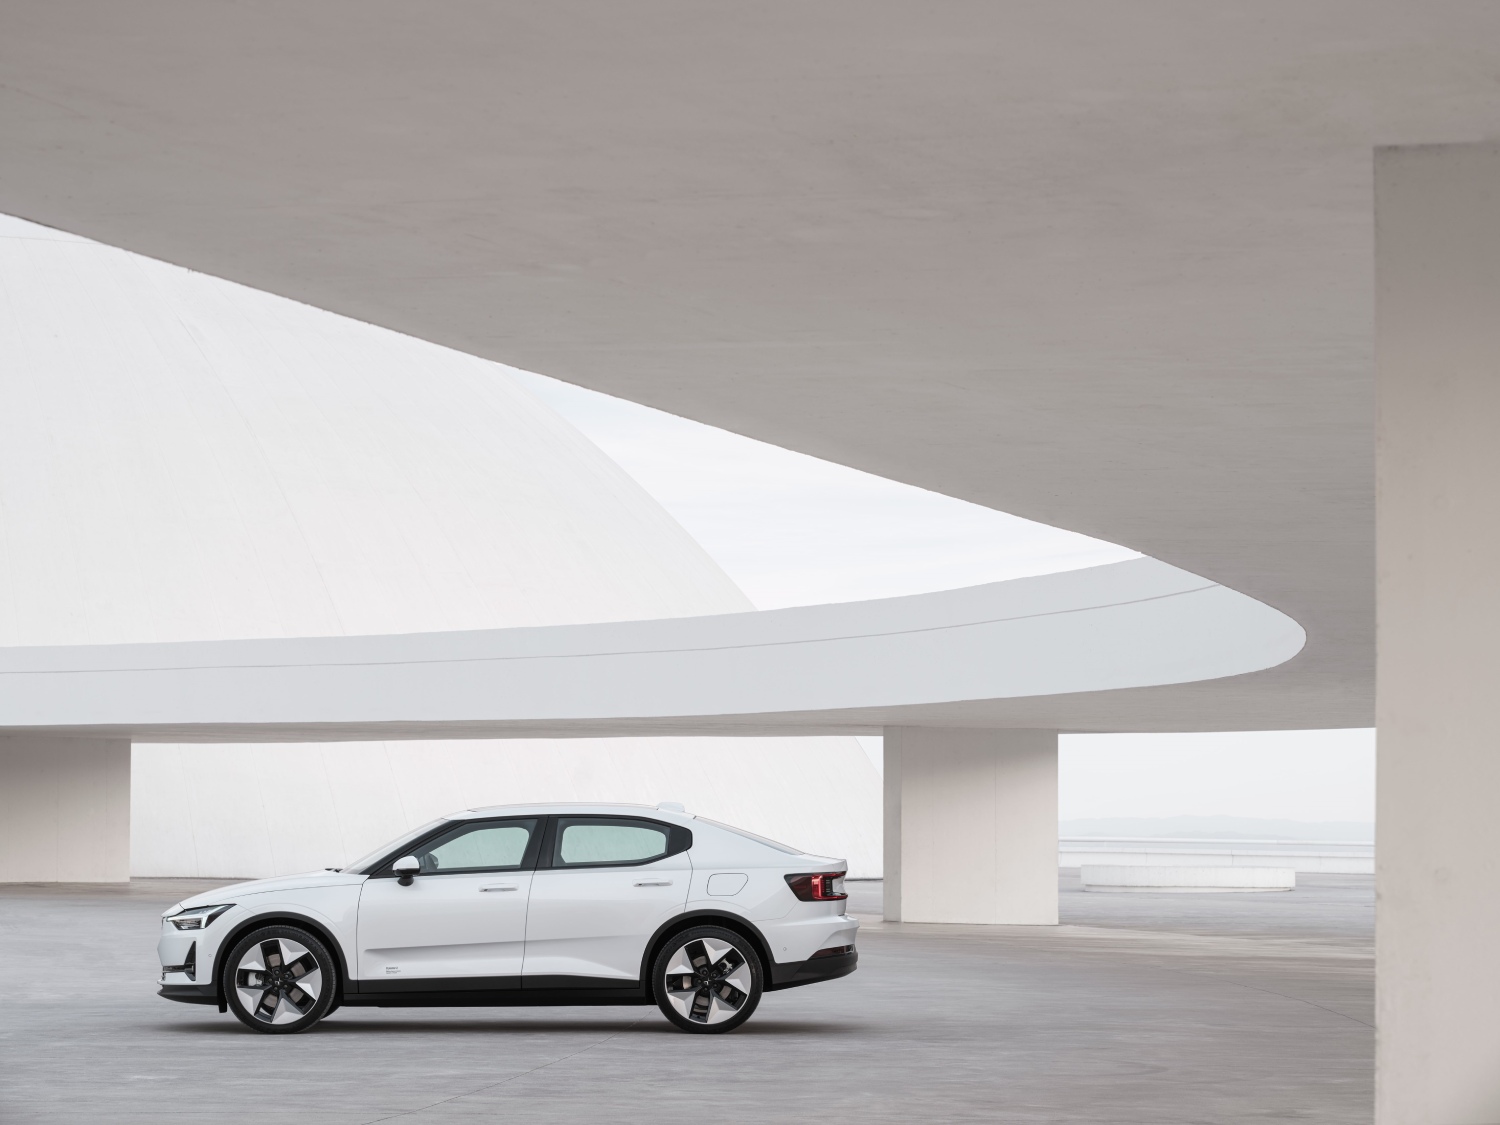 The best hot hatchbacks of 2022 include the Polestar 2